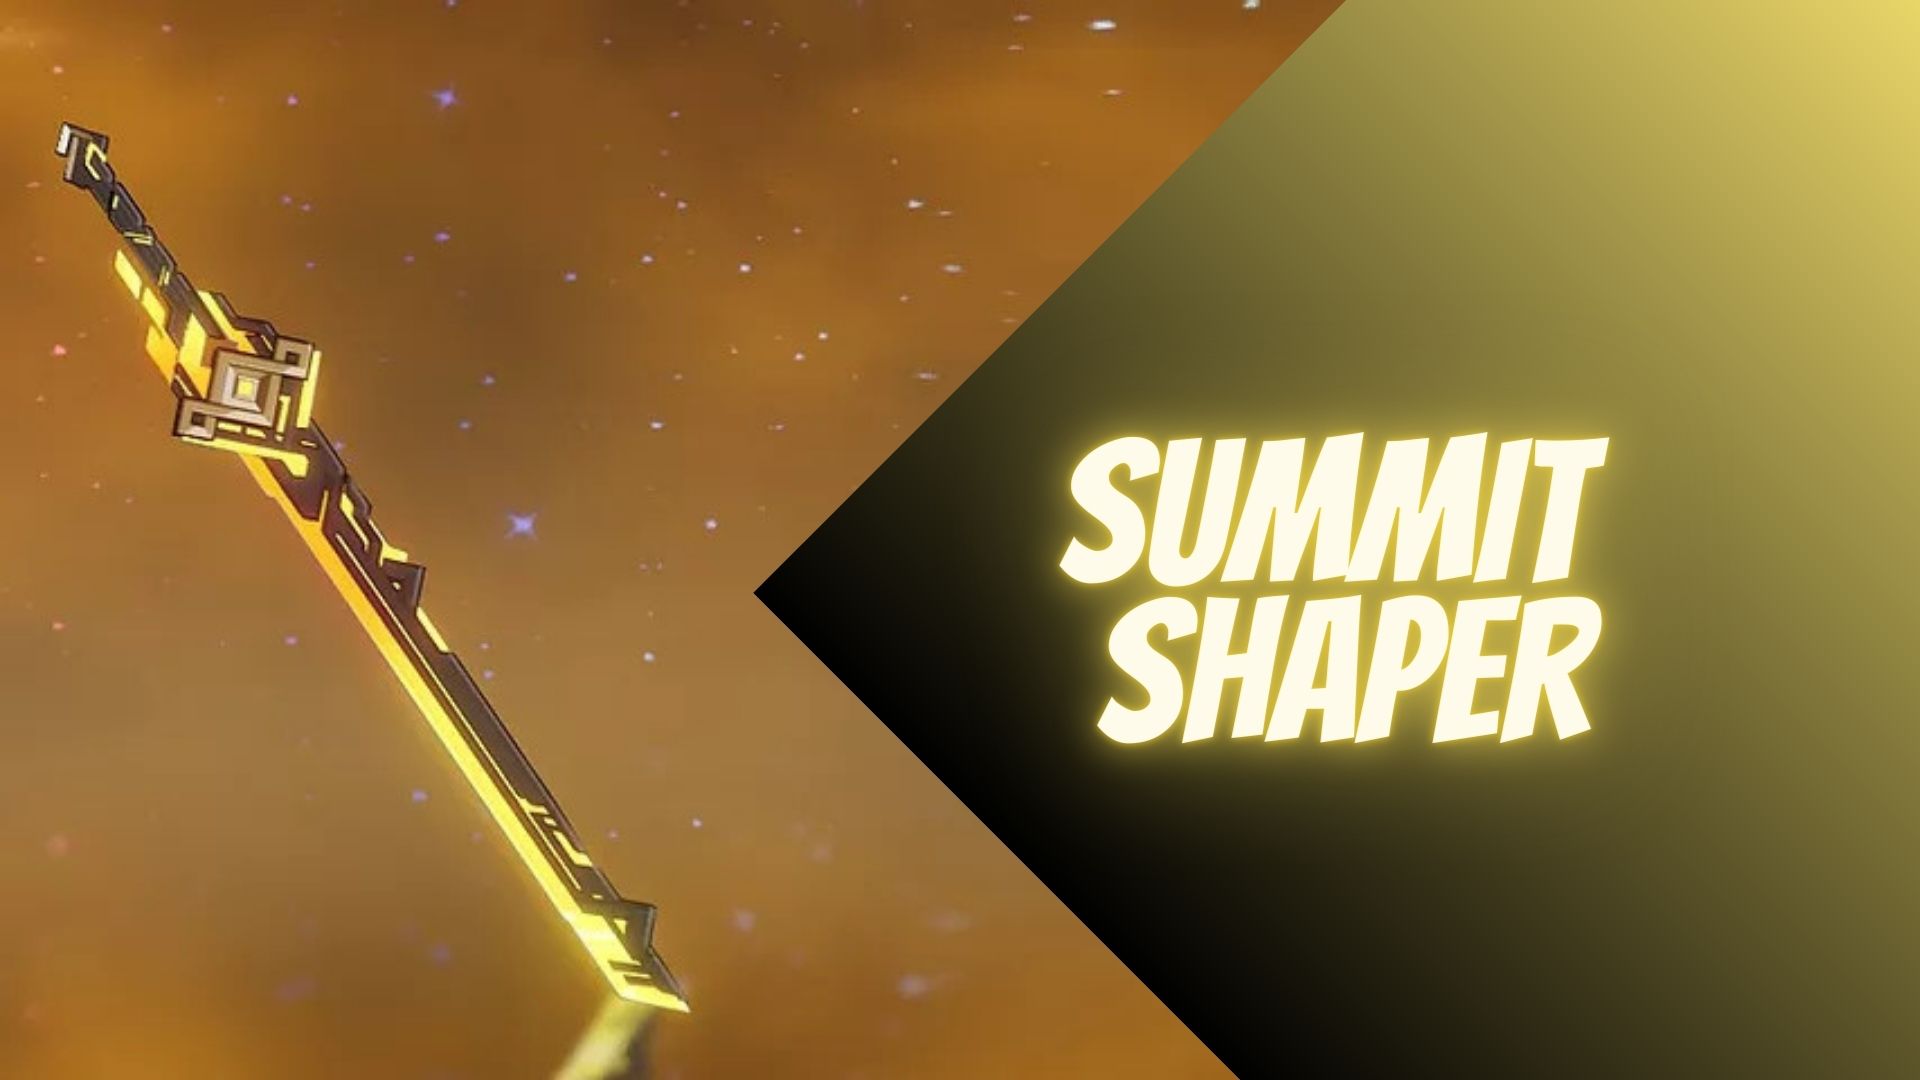 Keqing's Best Weapons: Summit Shaper